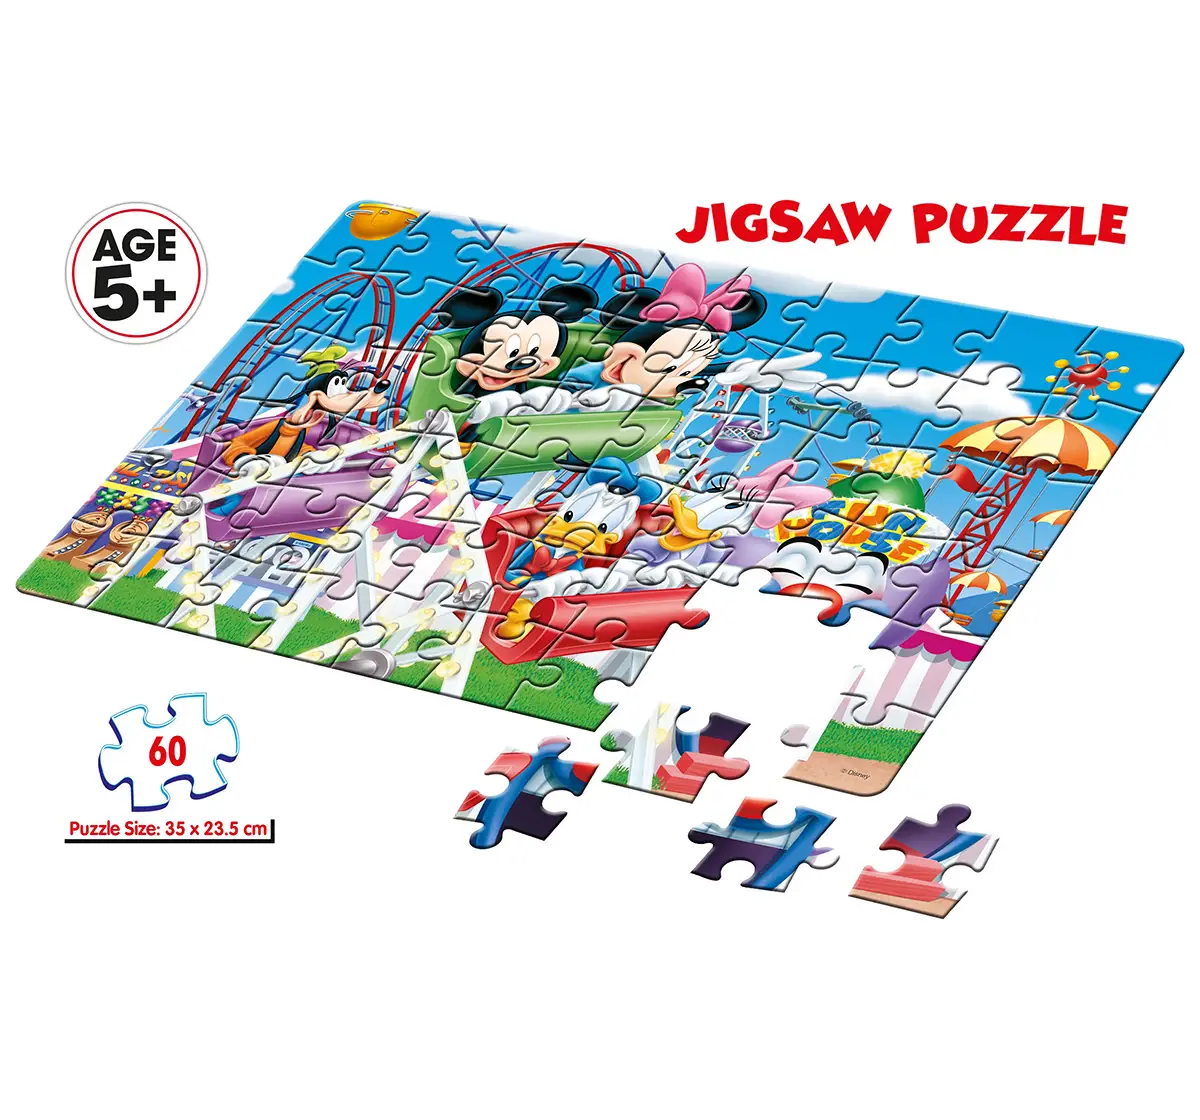 Disney  Frank Mickey Mouse On Joy Ride Puzzle  for Kids age 5Y+ 